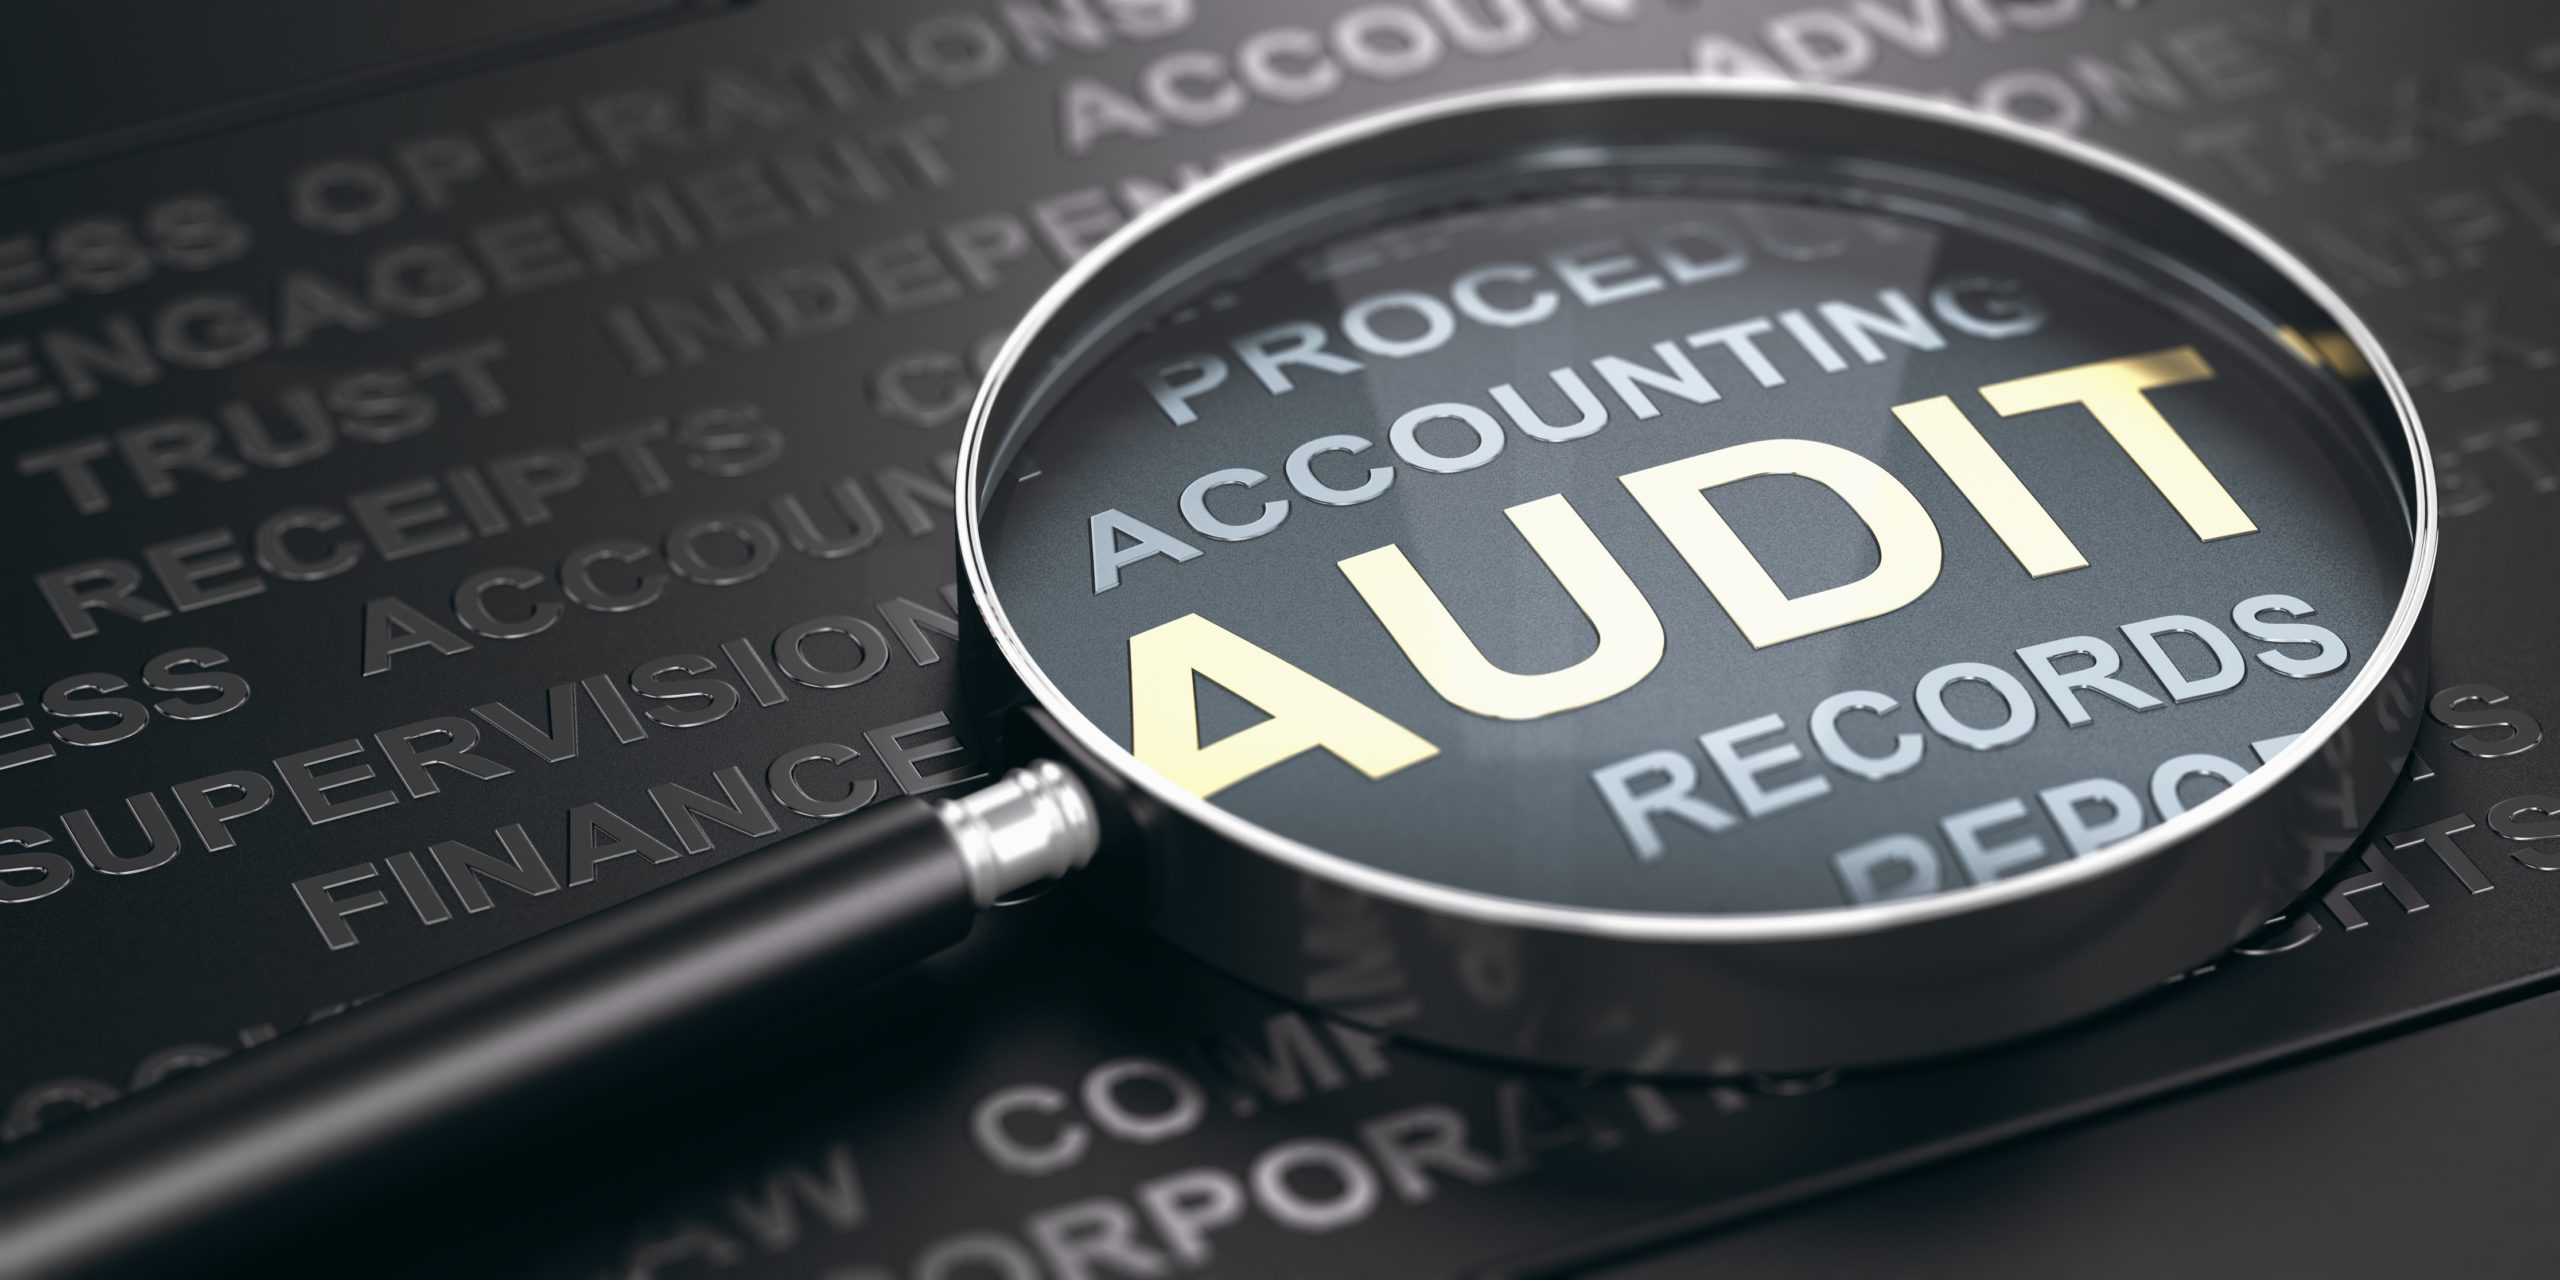 significant audit findings